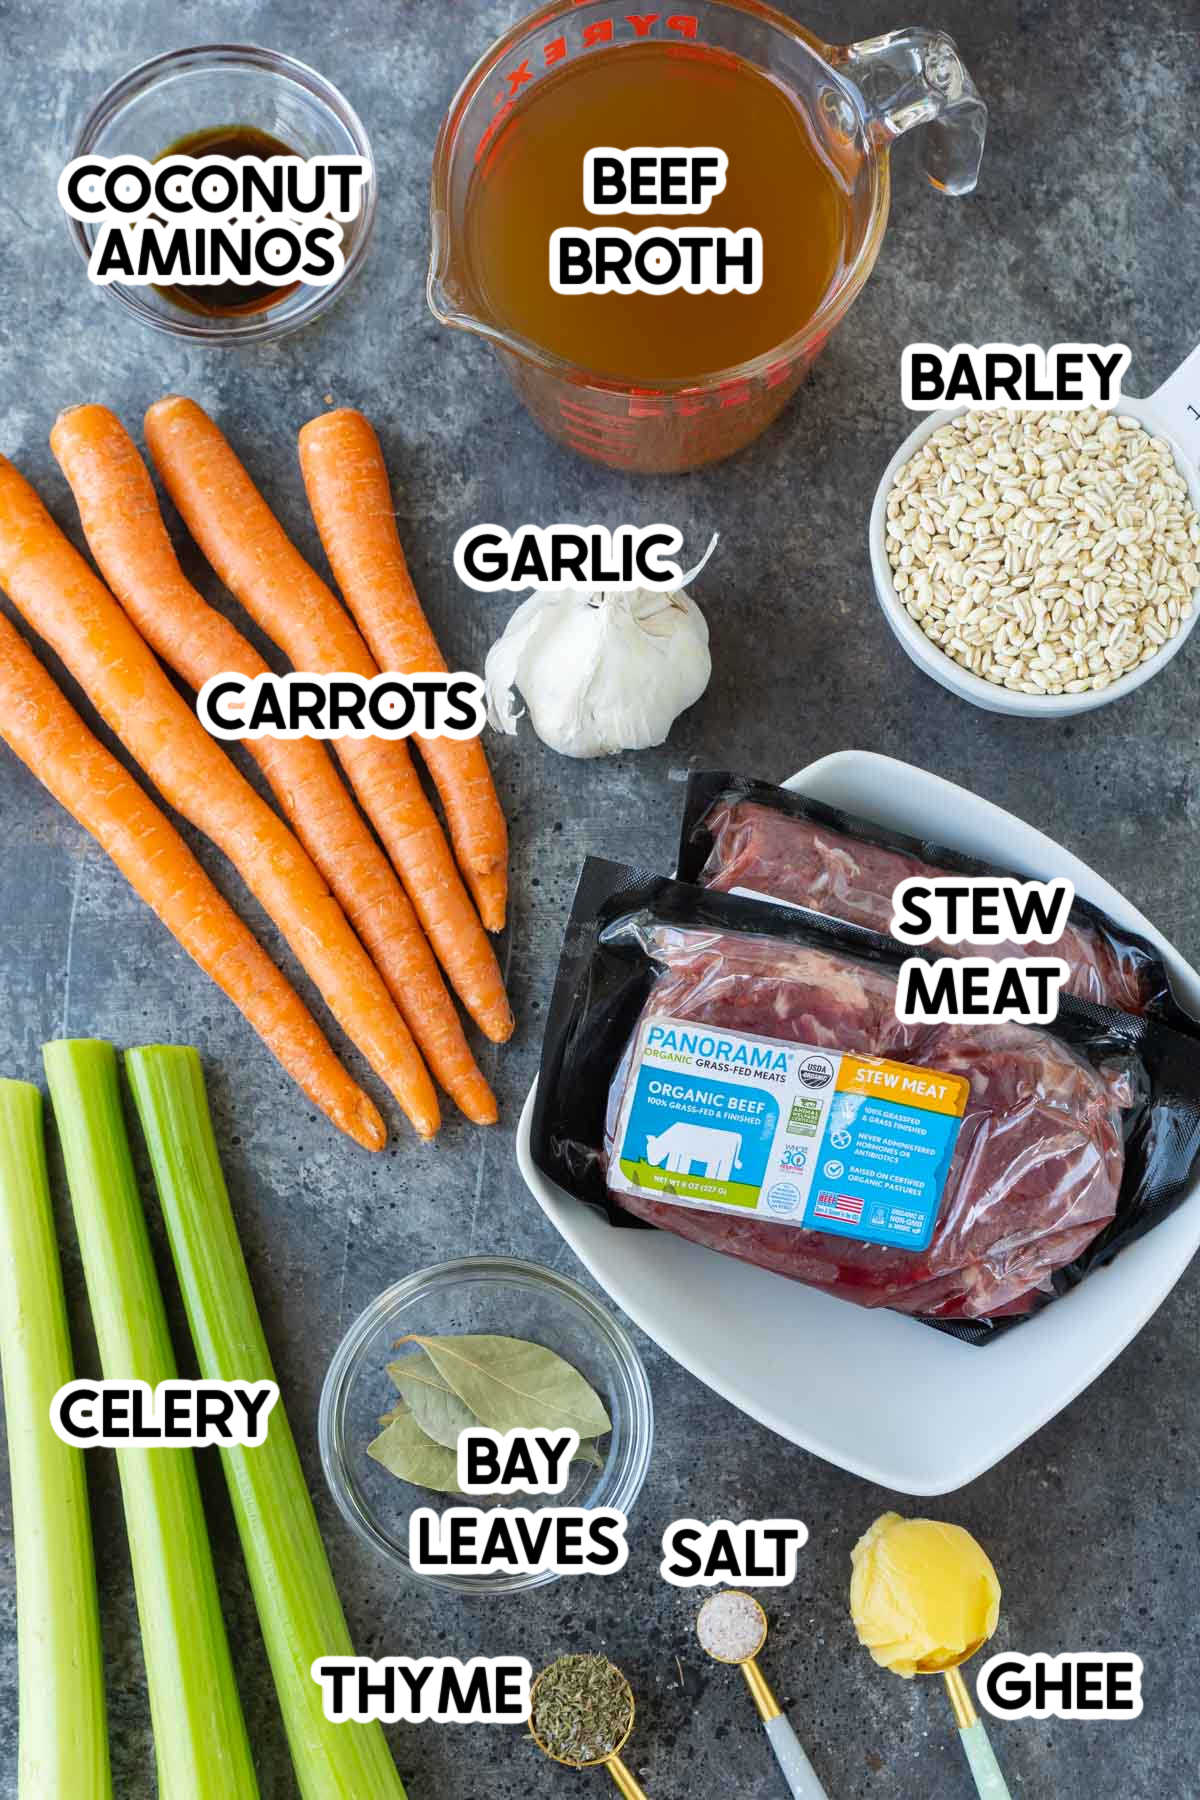 Carrots, veggies, and other ingredients needed to make beef barley soup